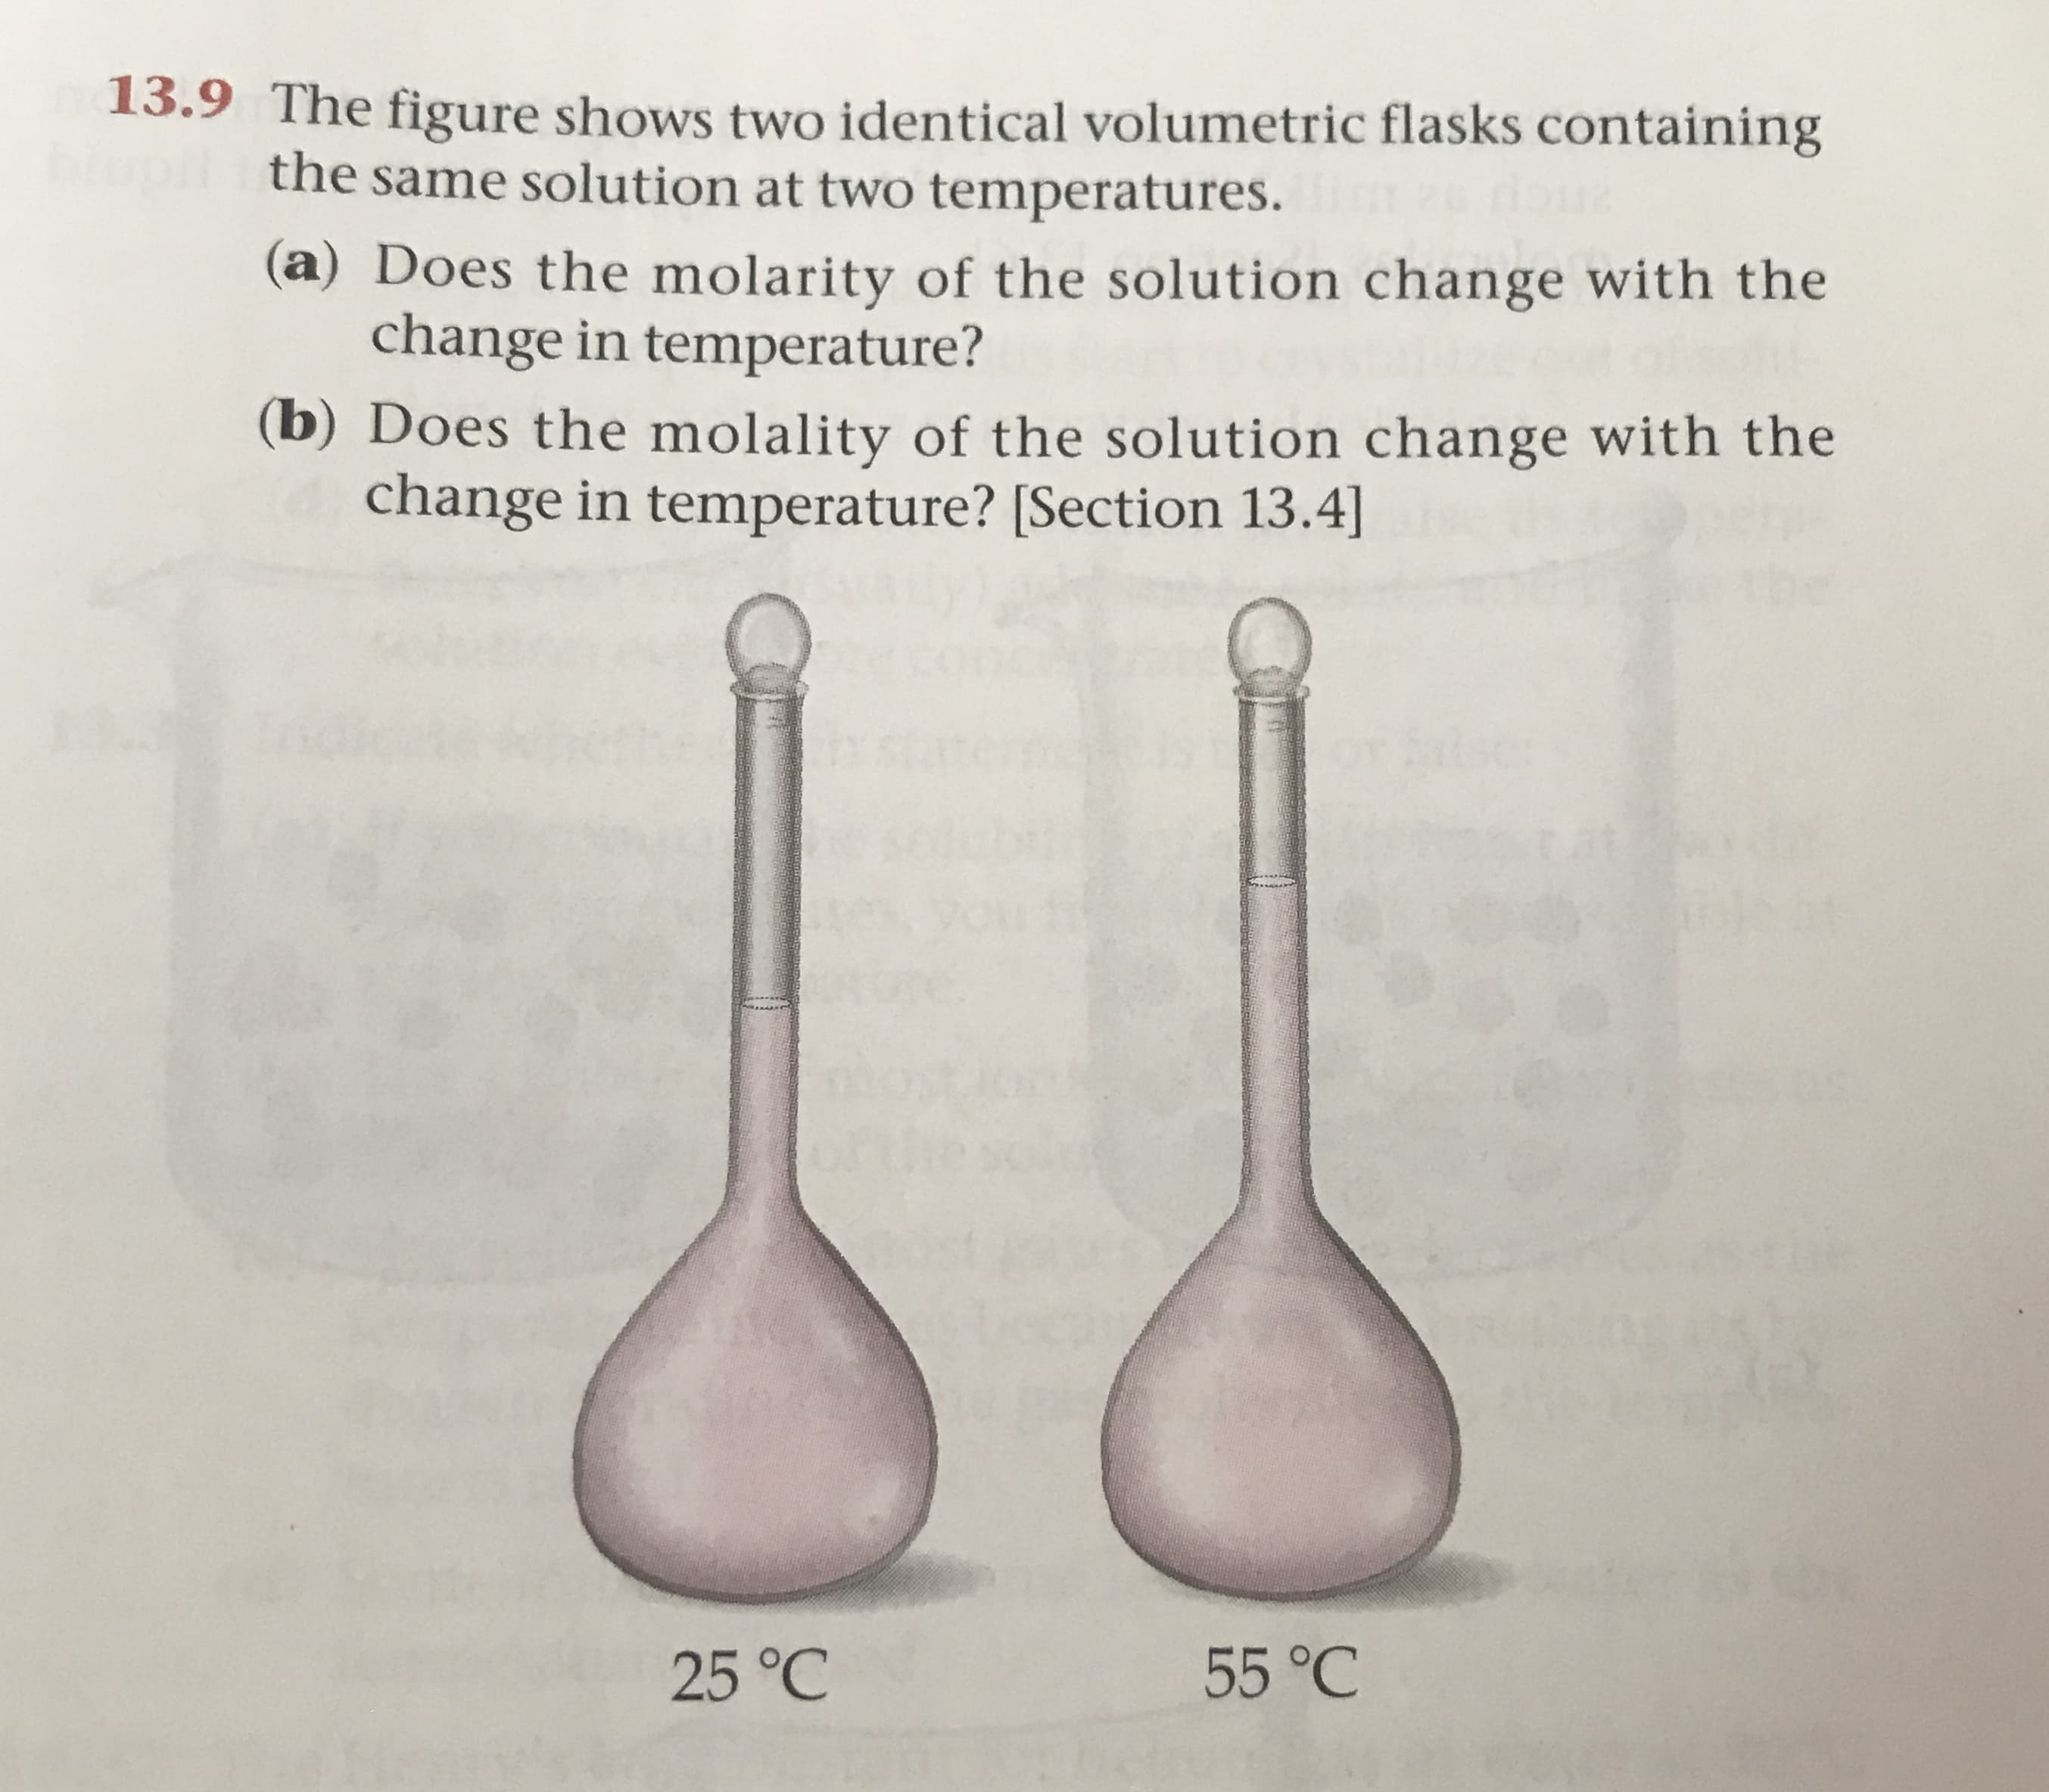 13.9 The figure shows two identical volumetric flasks containing
the same solution at two temperatures
(a) Does the molarity of the solution change with the
change in temperature?
(b) Does the molality of the solution change with the
change in temperature? [Section 13.4]
0at
55 °C
25 °C
